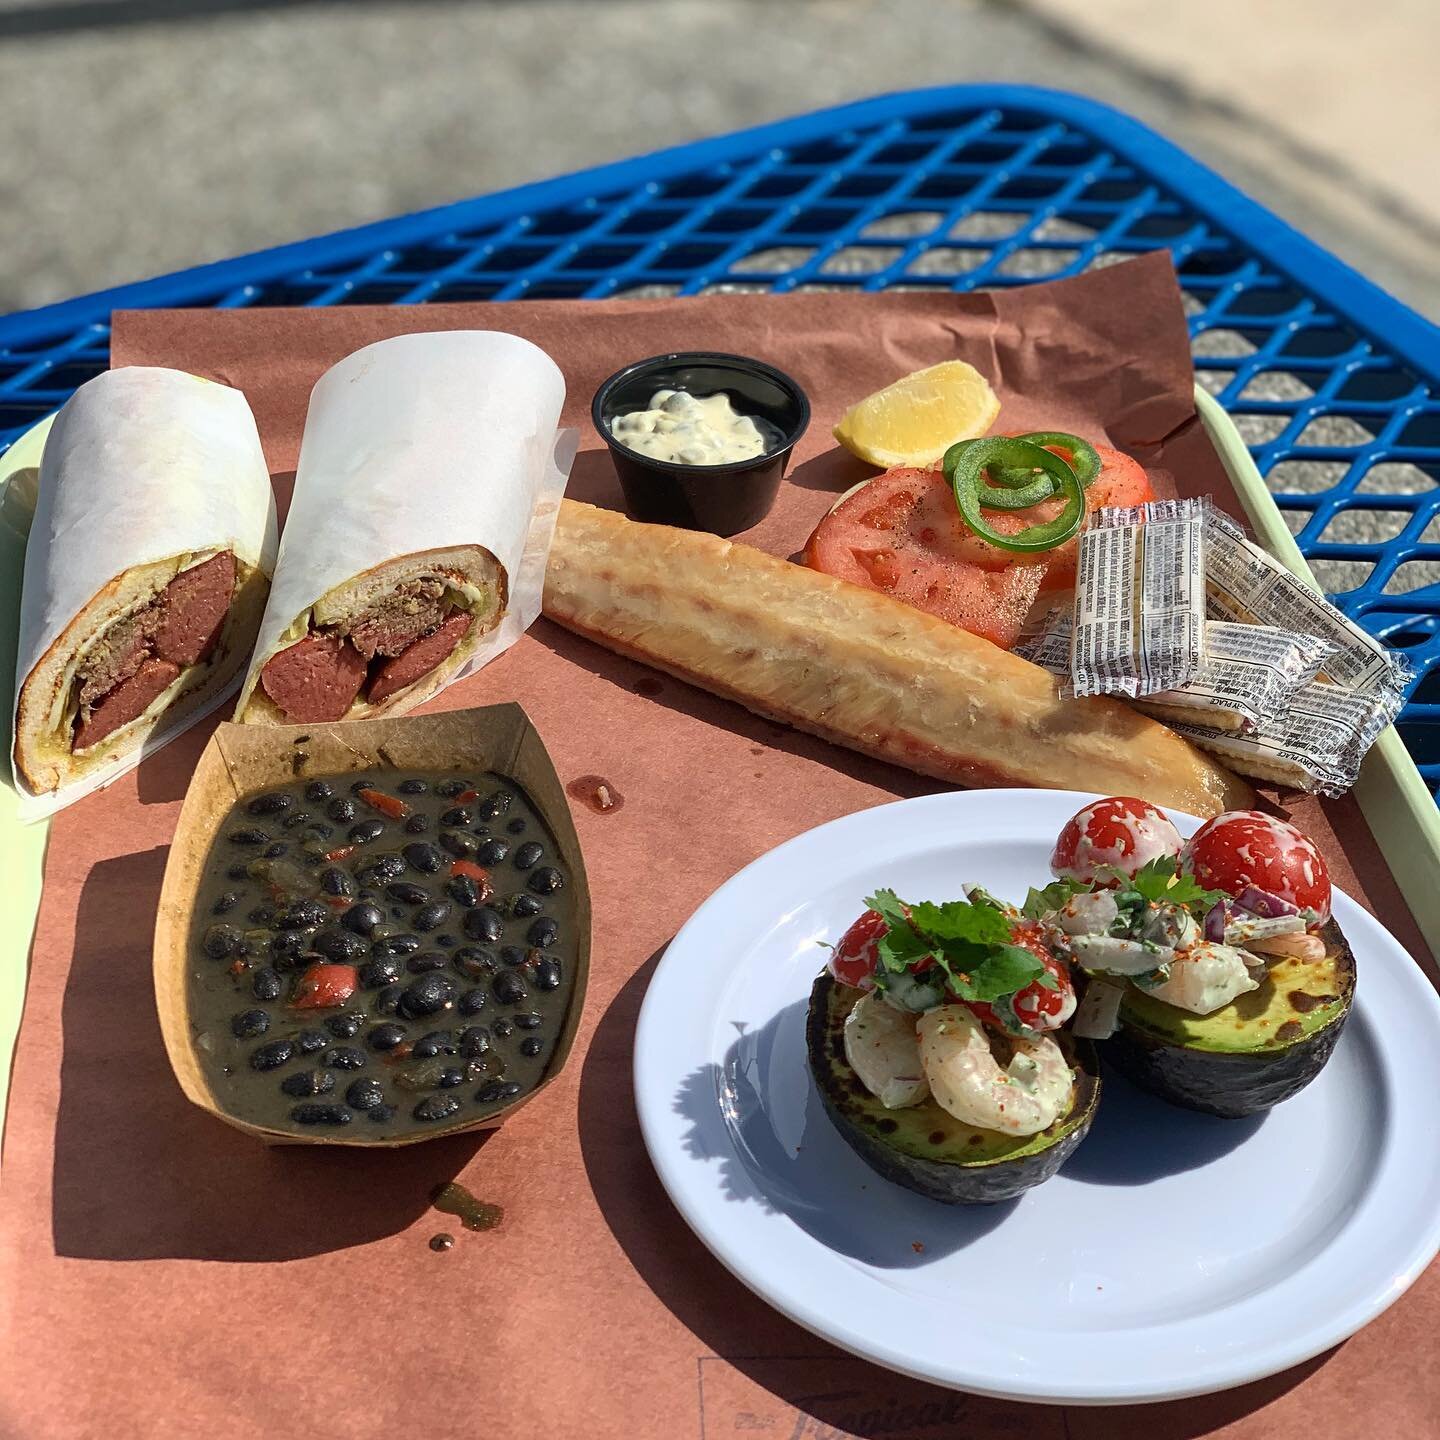 What&rsquo;s Florida barbecue? Smoked cobia, hot dog medianoche, shrimp stuffed avocado, smoky black beans
@tropical_smokehouse 

#barbecue #floridabarbecue #smokedfish #medianoche #hotdog #avocado🥑 #palmbeacheats